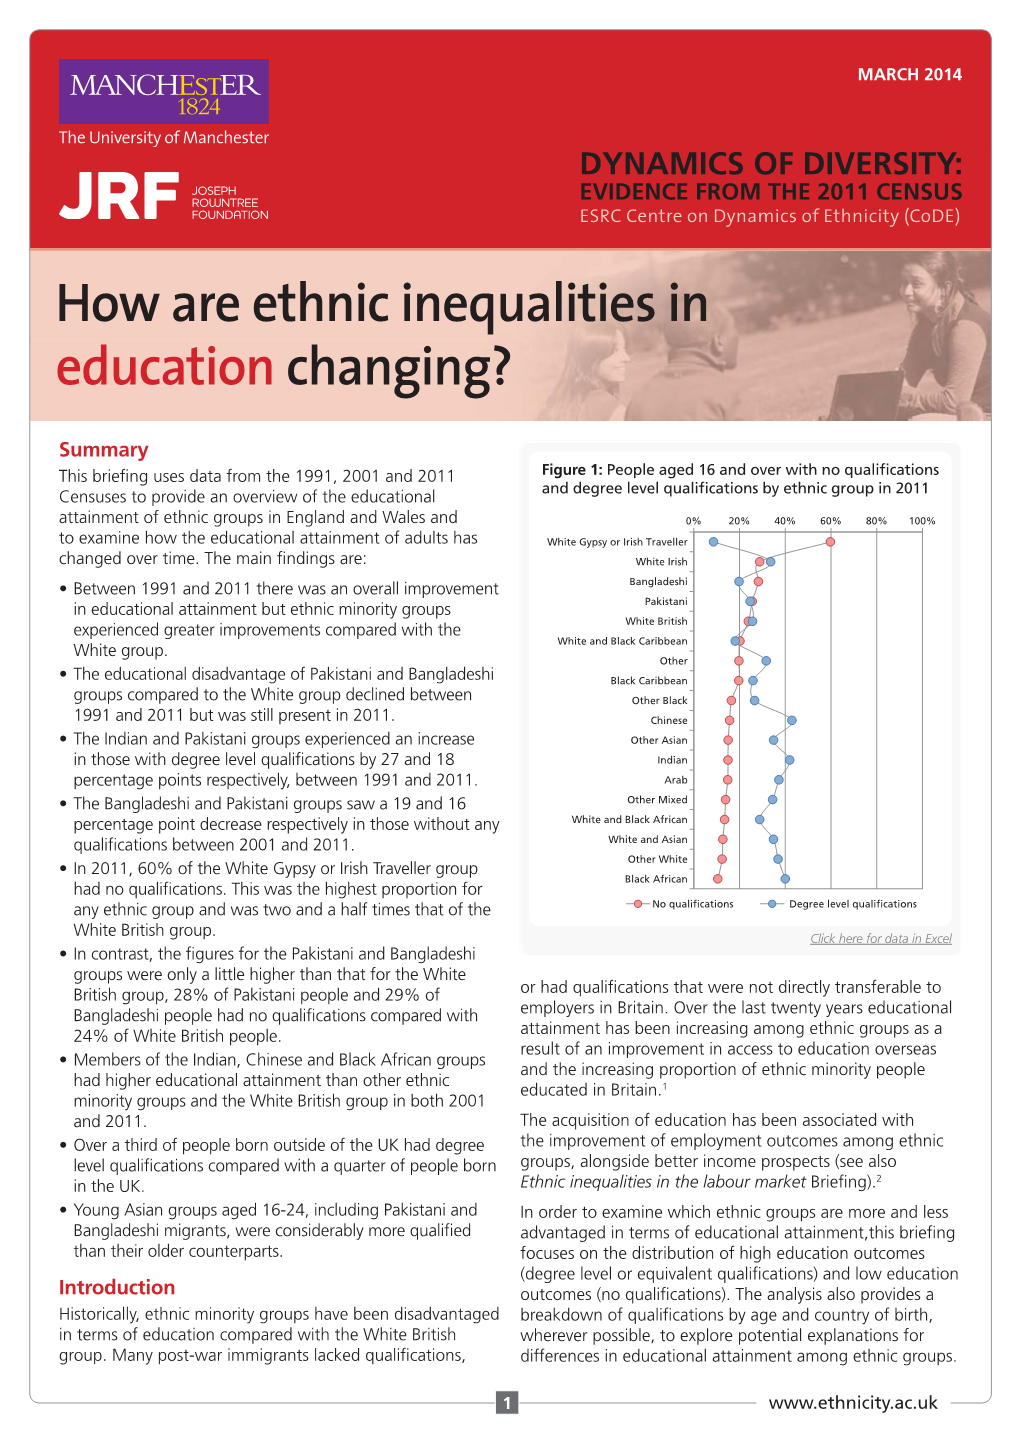 How Are Ethnic Inequalities in Educationchanging?